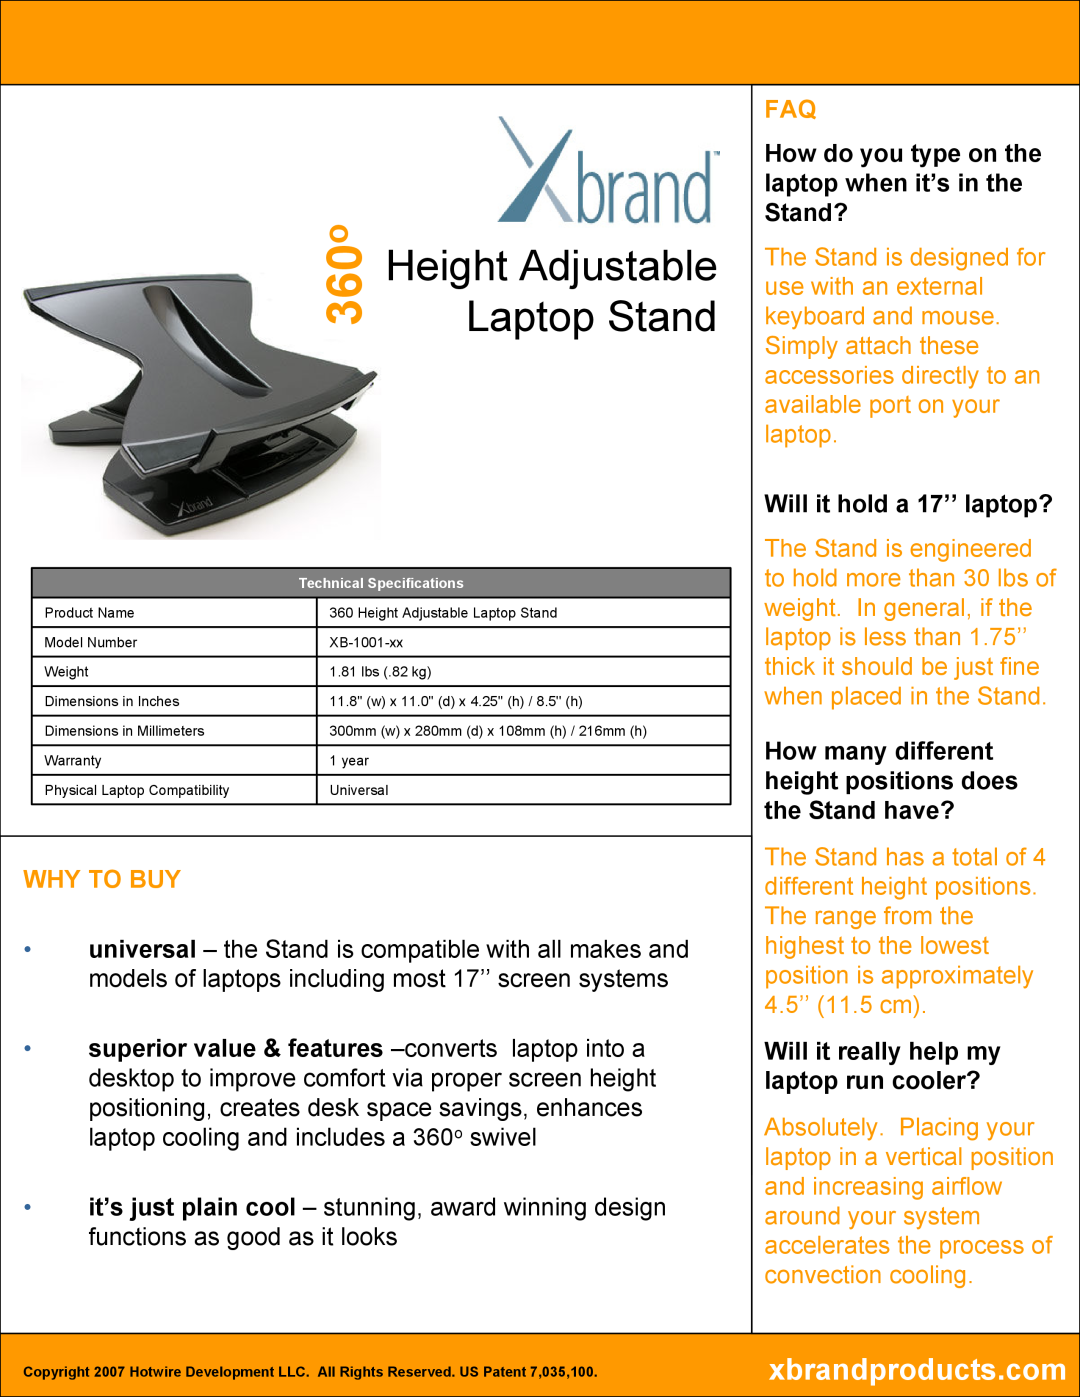 Xbrand XB-1001-xx, 360o Swivel manual Height Adjustable, Laptop Stand, Why To Buy, Will it hold a 17’’ laptop? 